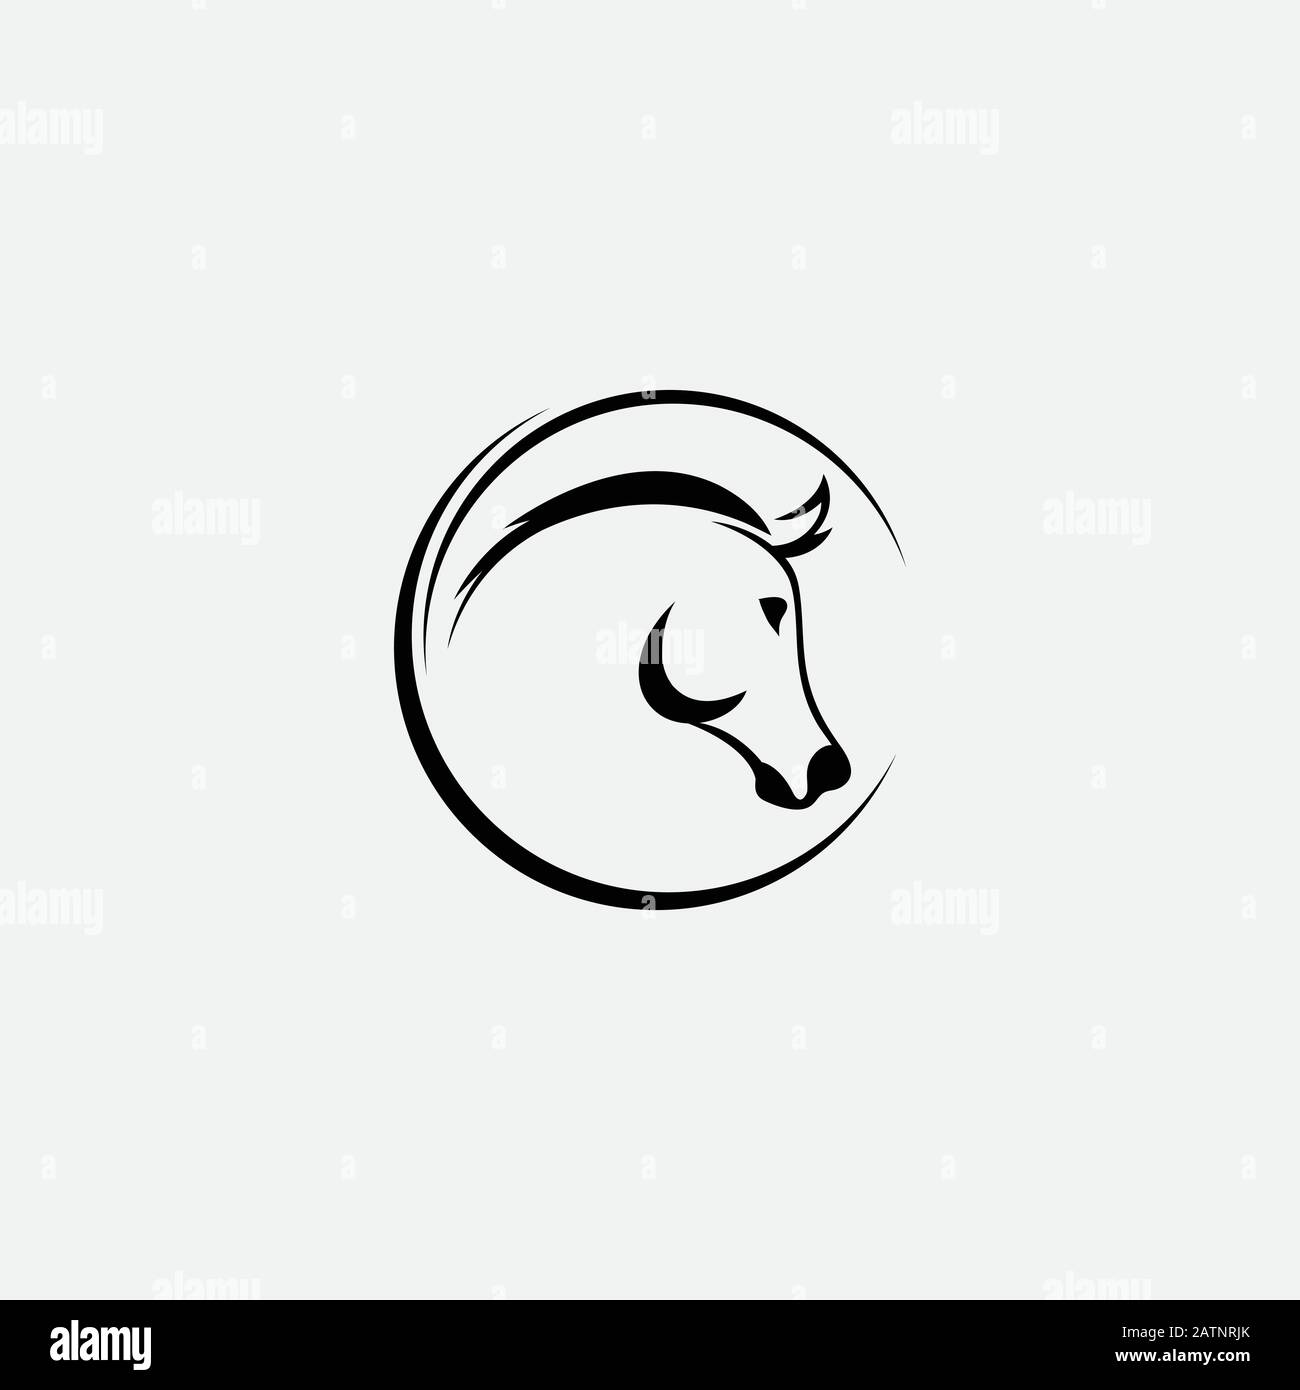 horse standing on three paws Icon Vector, horse standing on three paws Icon Eps, horse standing on three paws Icon Stock Vector